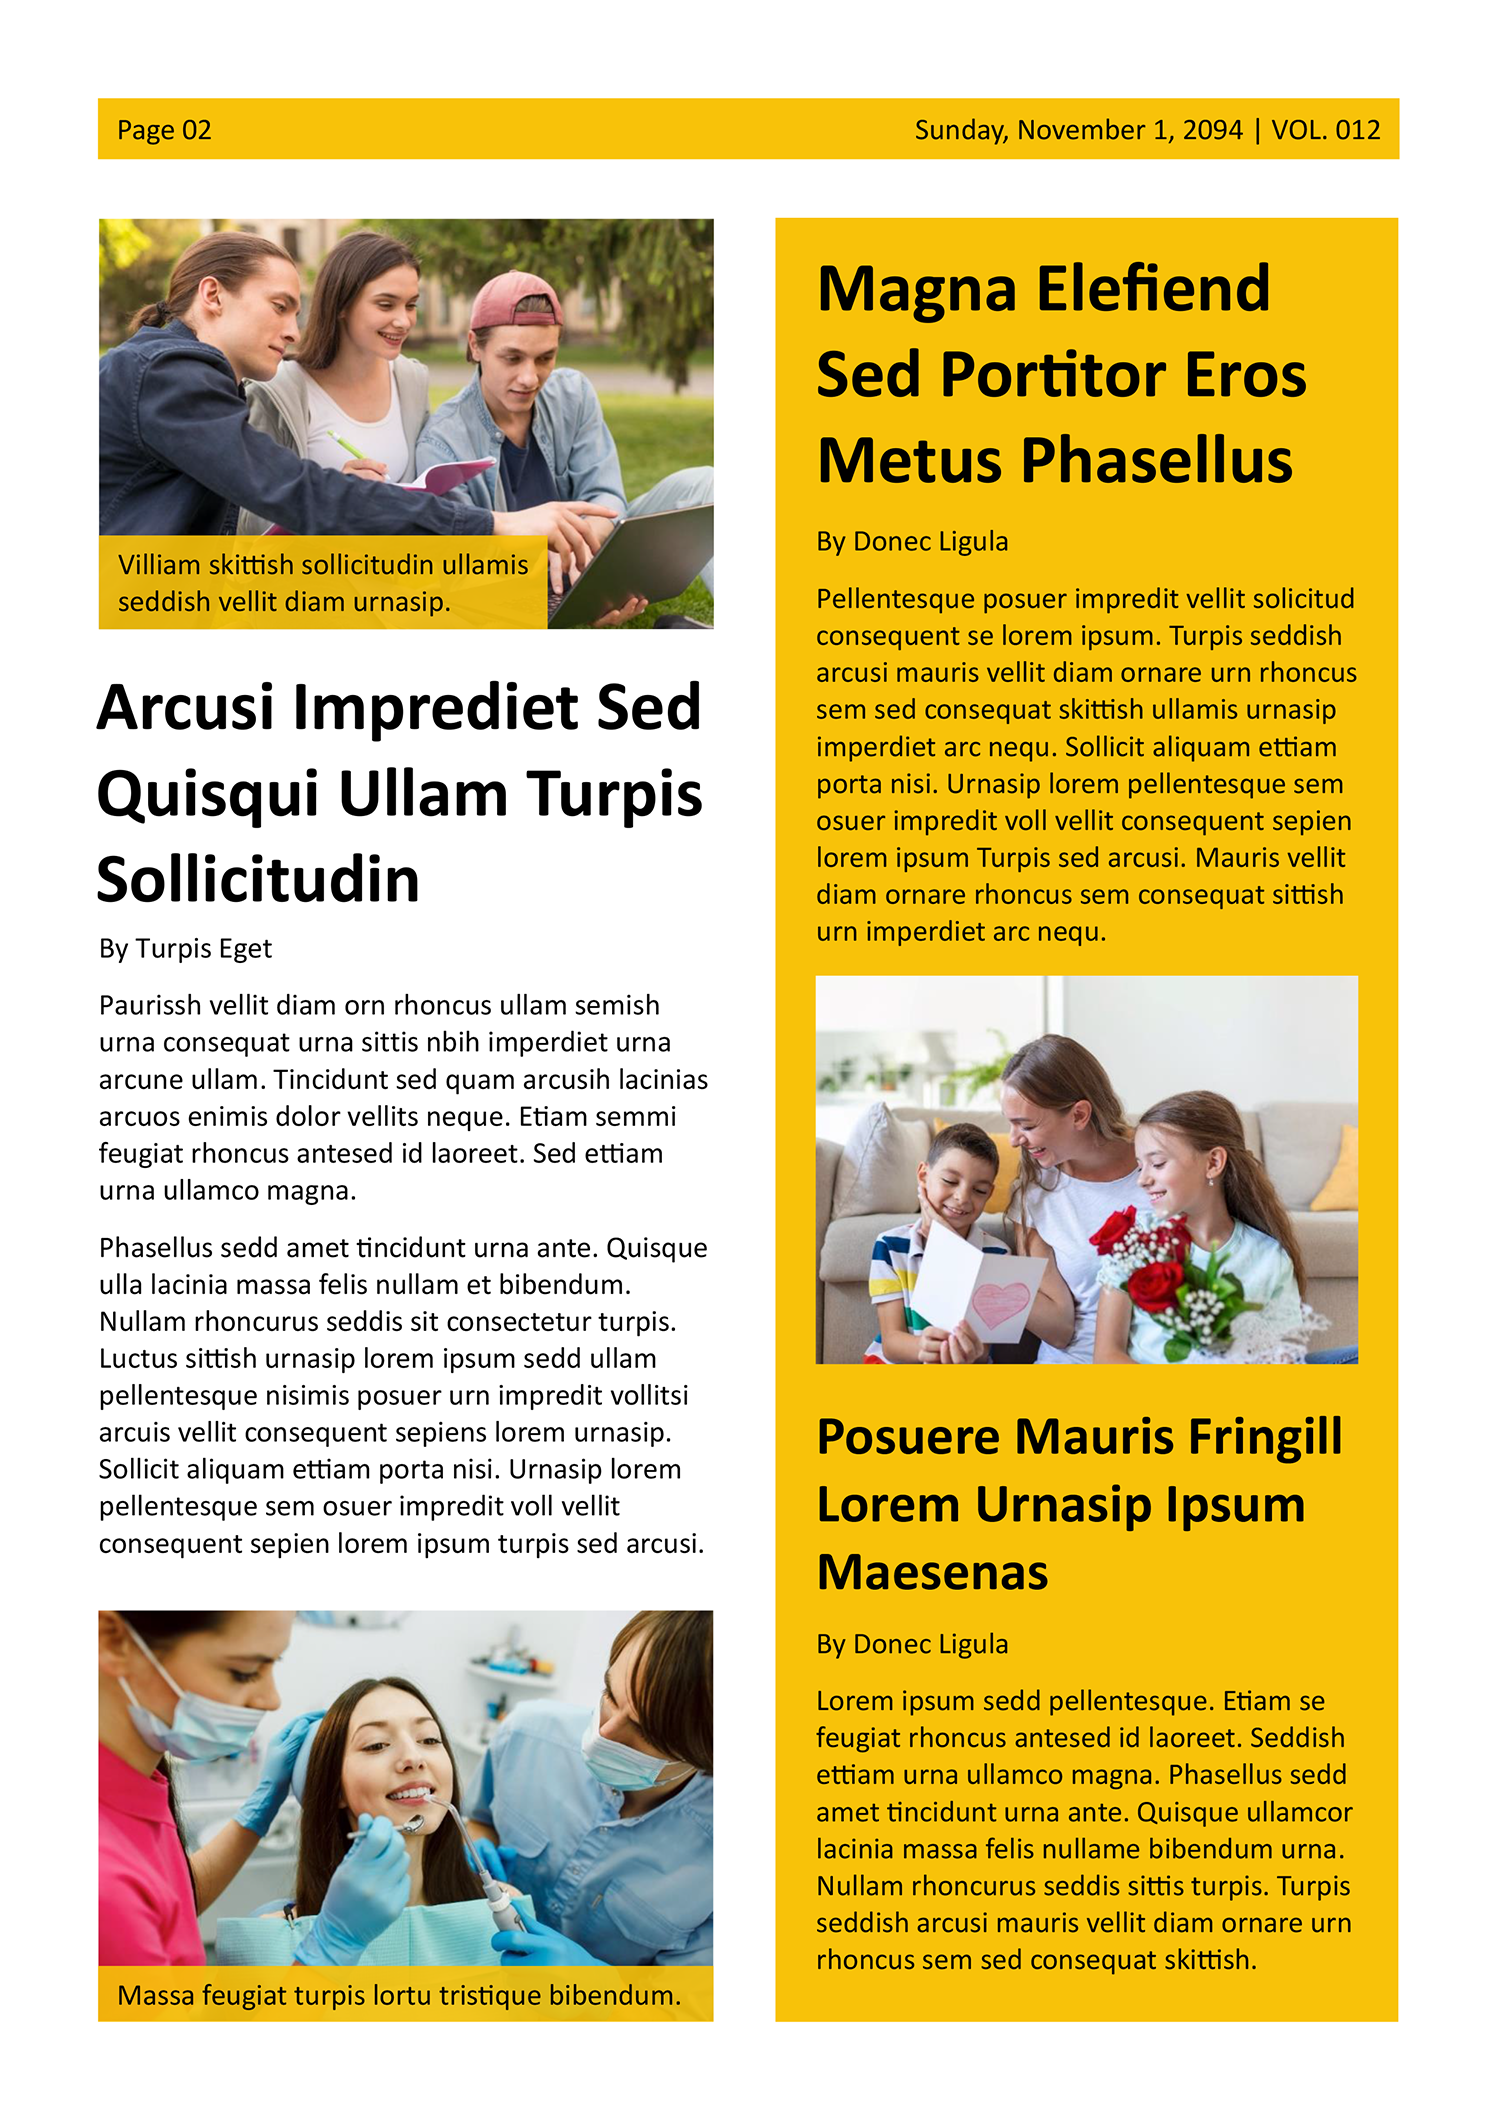 Yellow and White Newspaper Front Page Template - Page 02